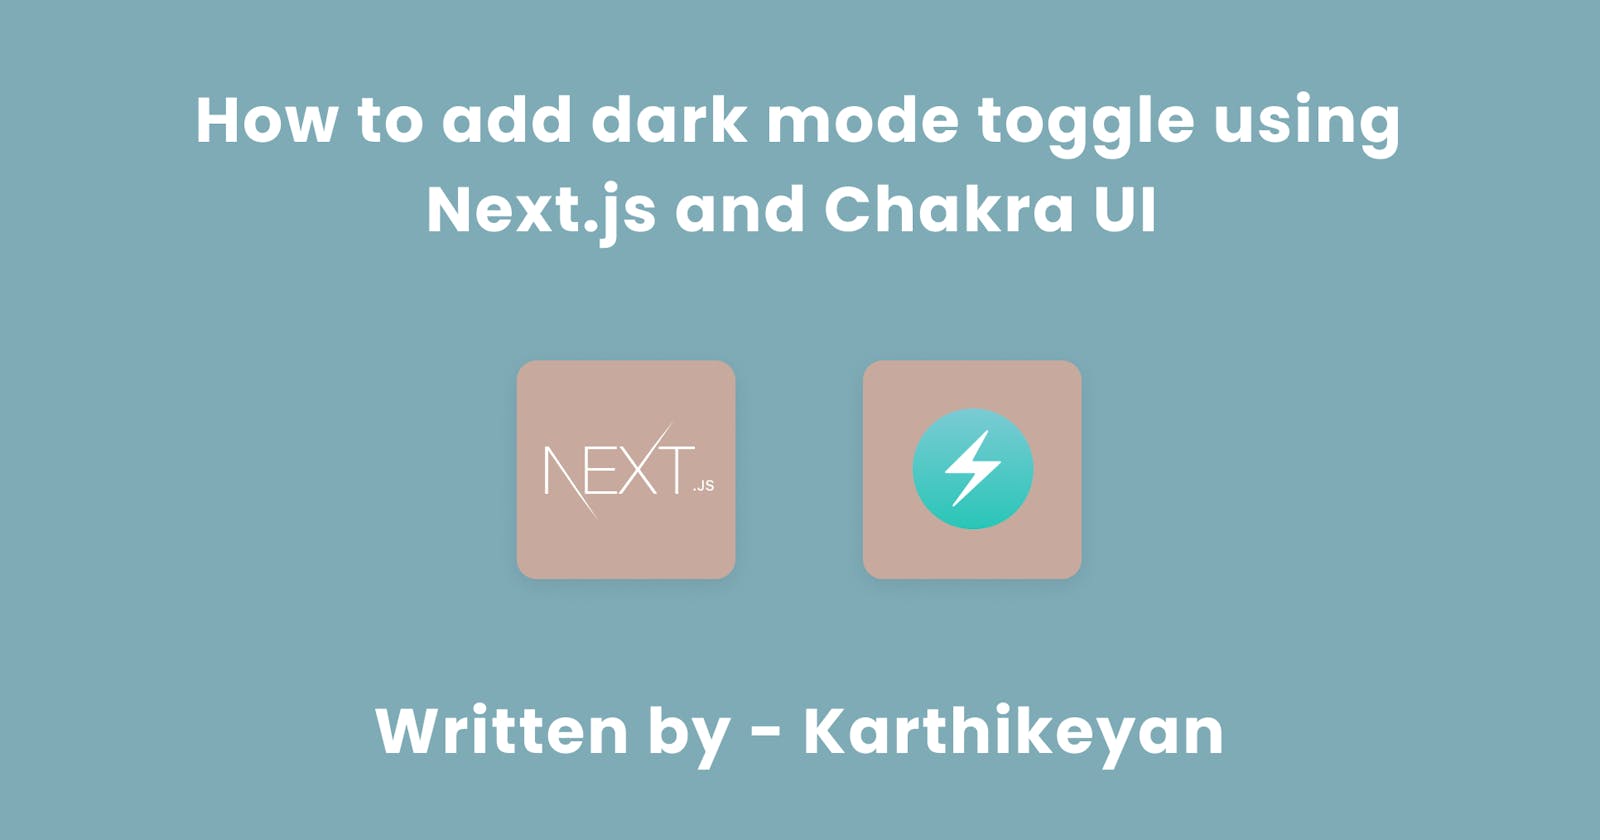 How to add dark mode toggle to Next.js application using Chakra UI